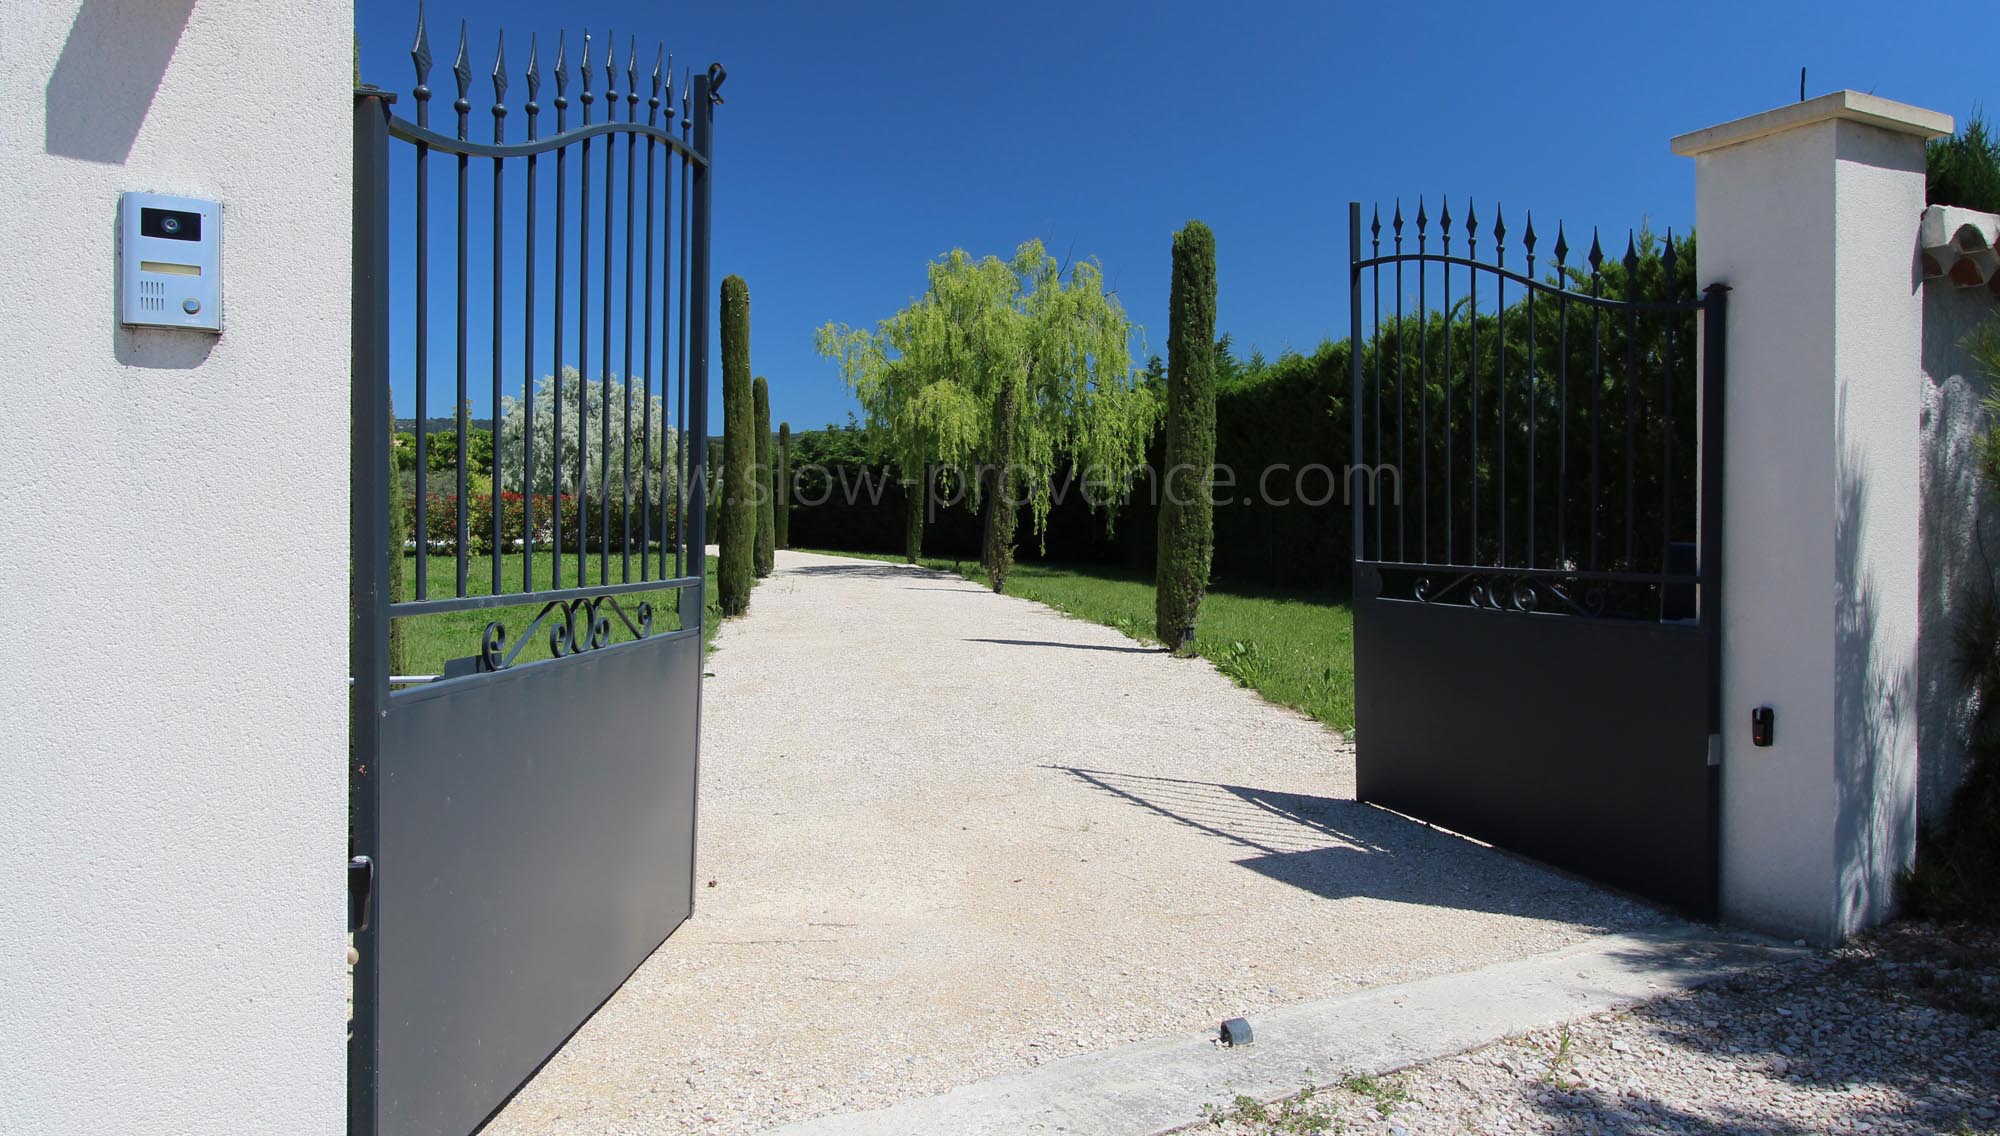 Electric gate and cypresses